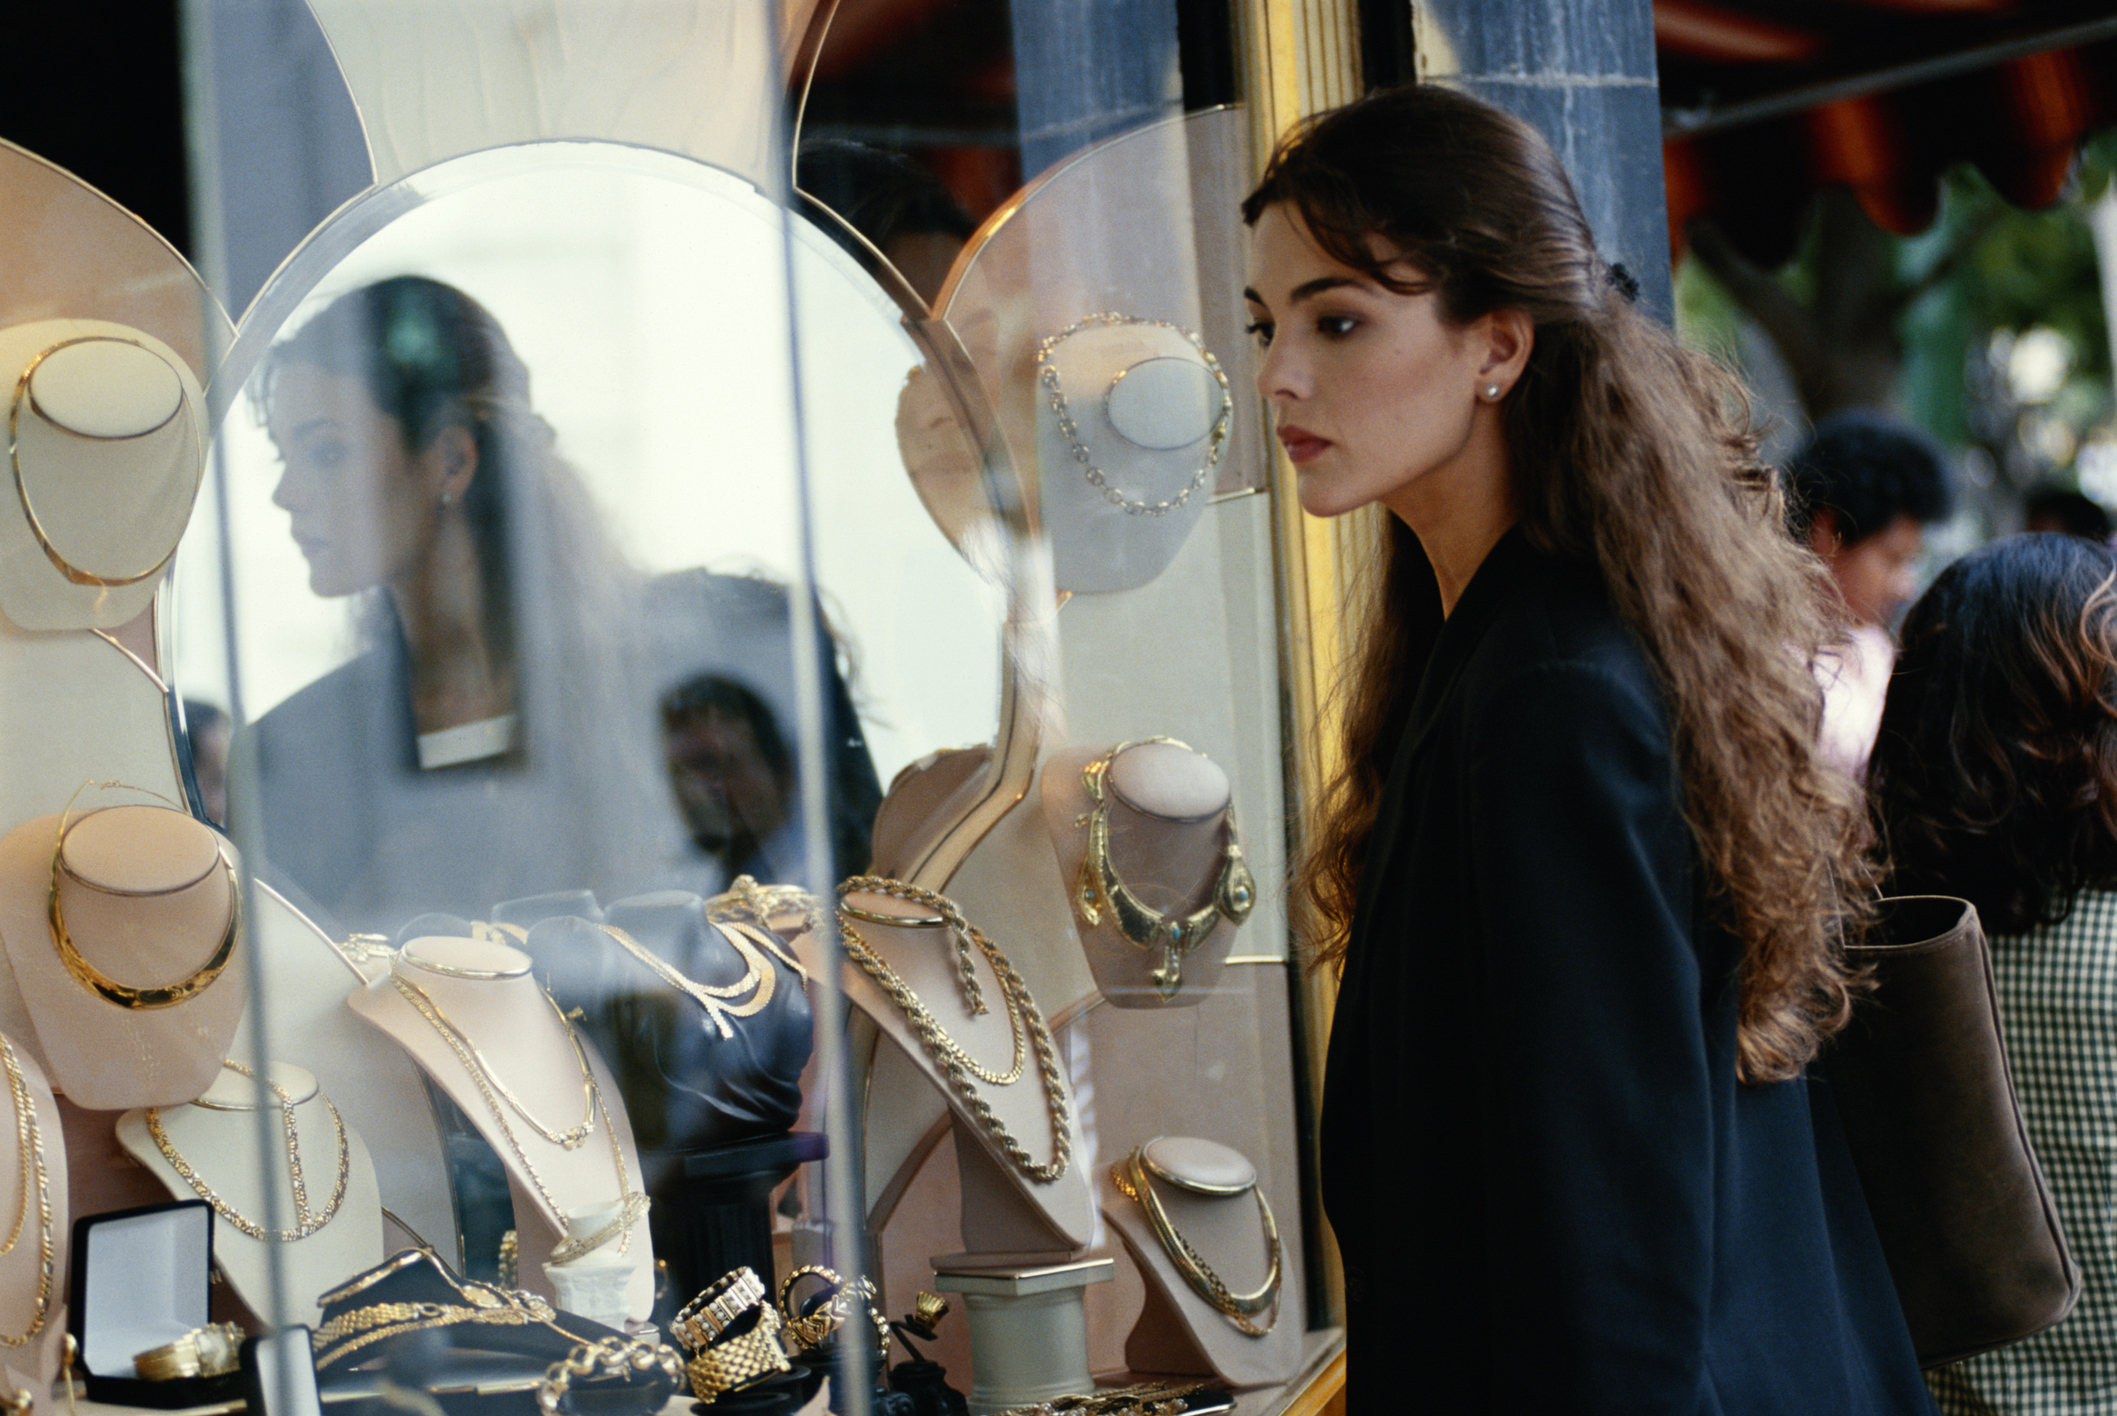 Woman looking at jewellery through a window